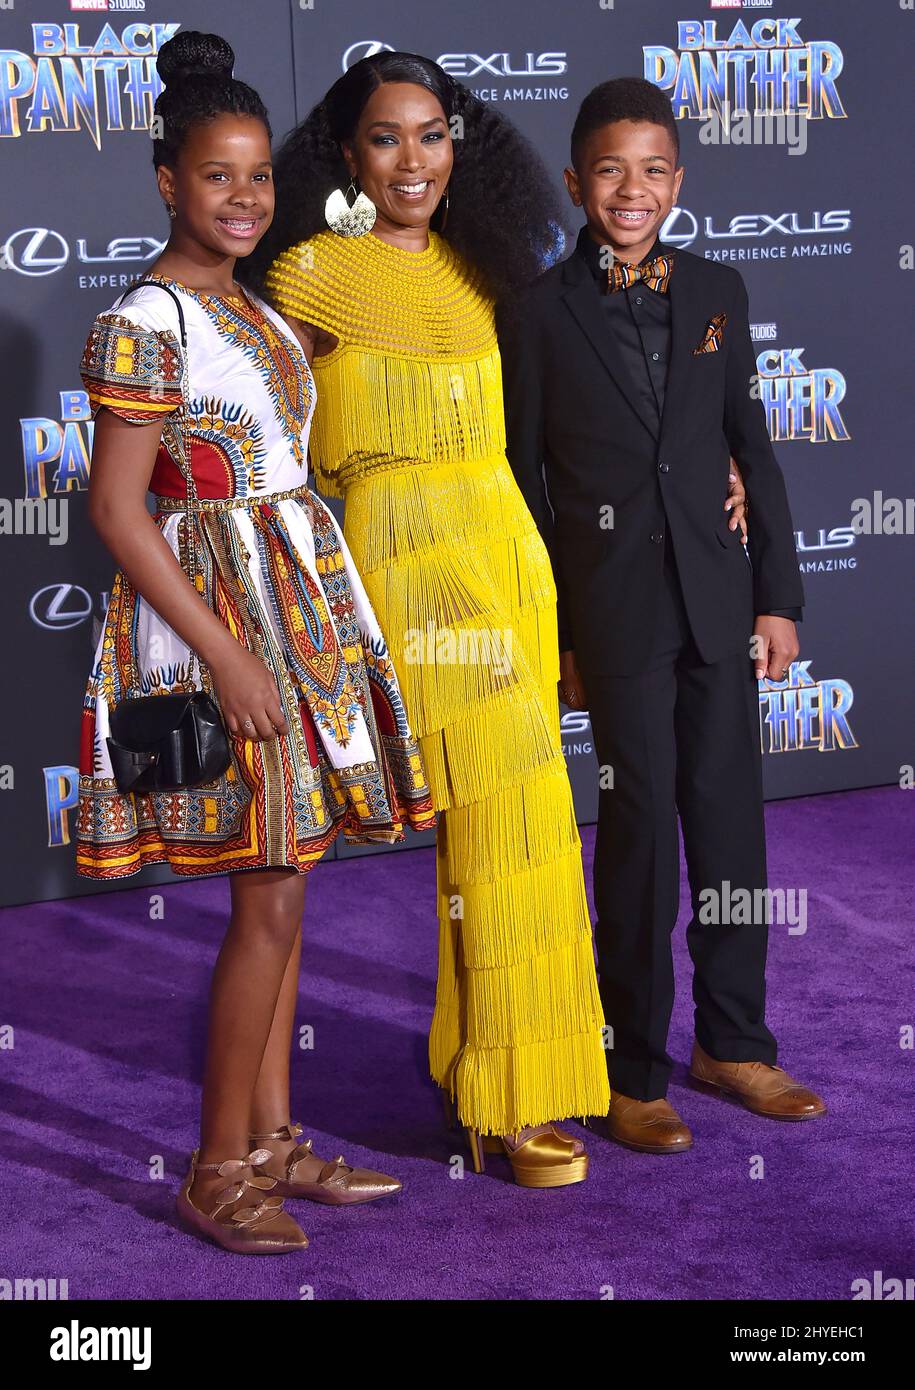 Angela Bassett, Bronwyn Vance and Slater Vance at the 'Black Panther' premiere held at the Dolby Theatre on January 29, 2018 in Hollywood, USA. Stock Photo